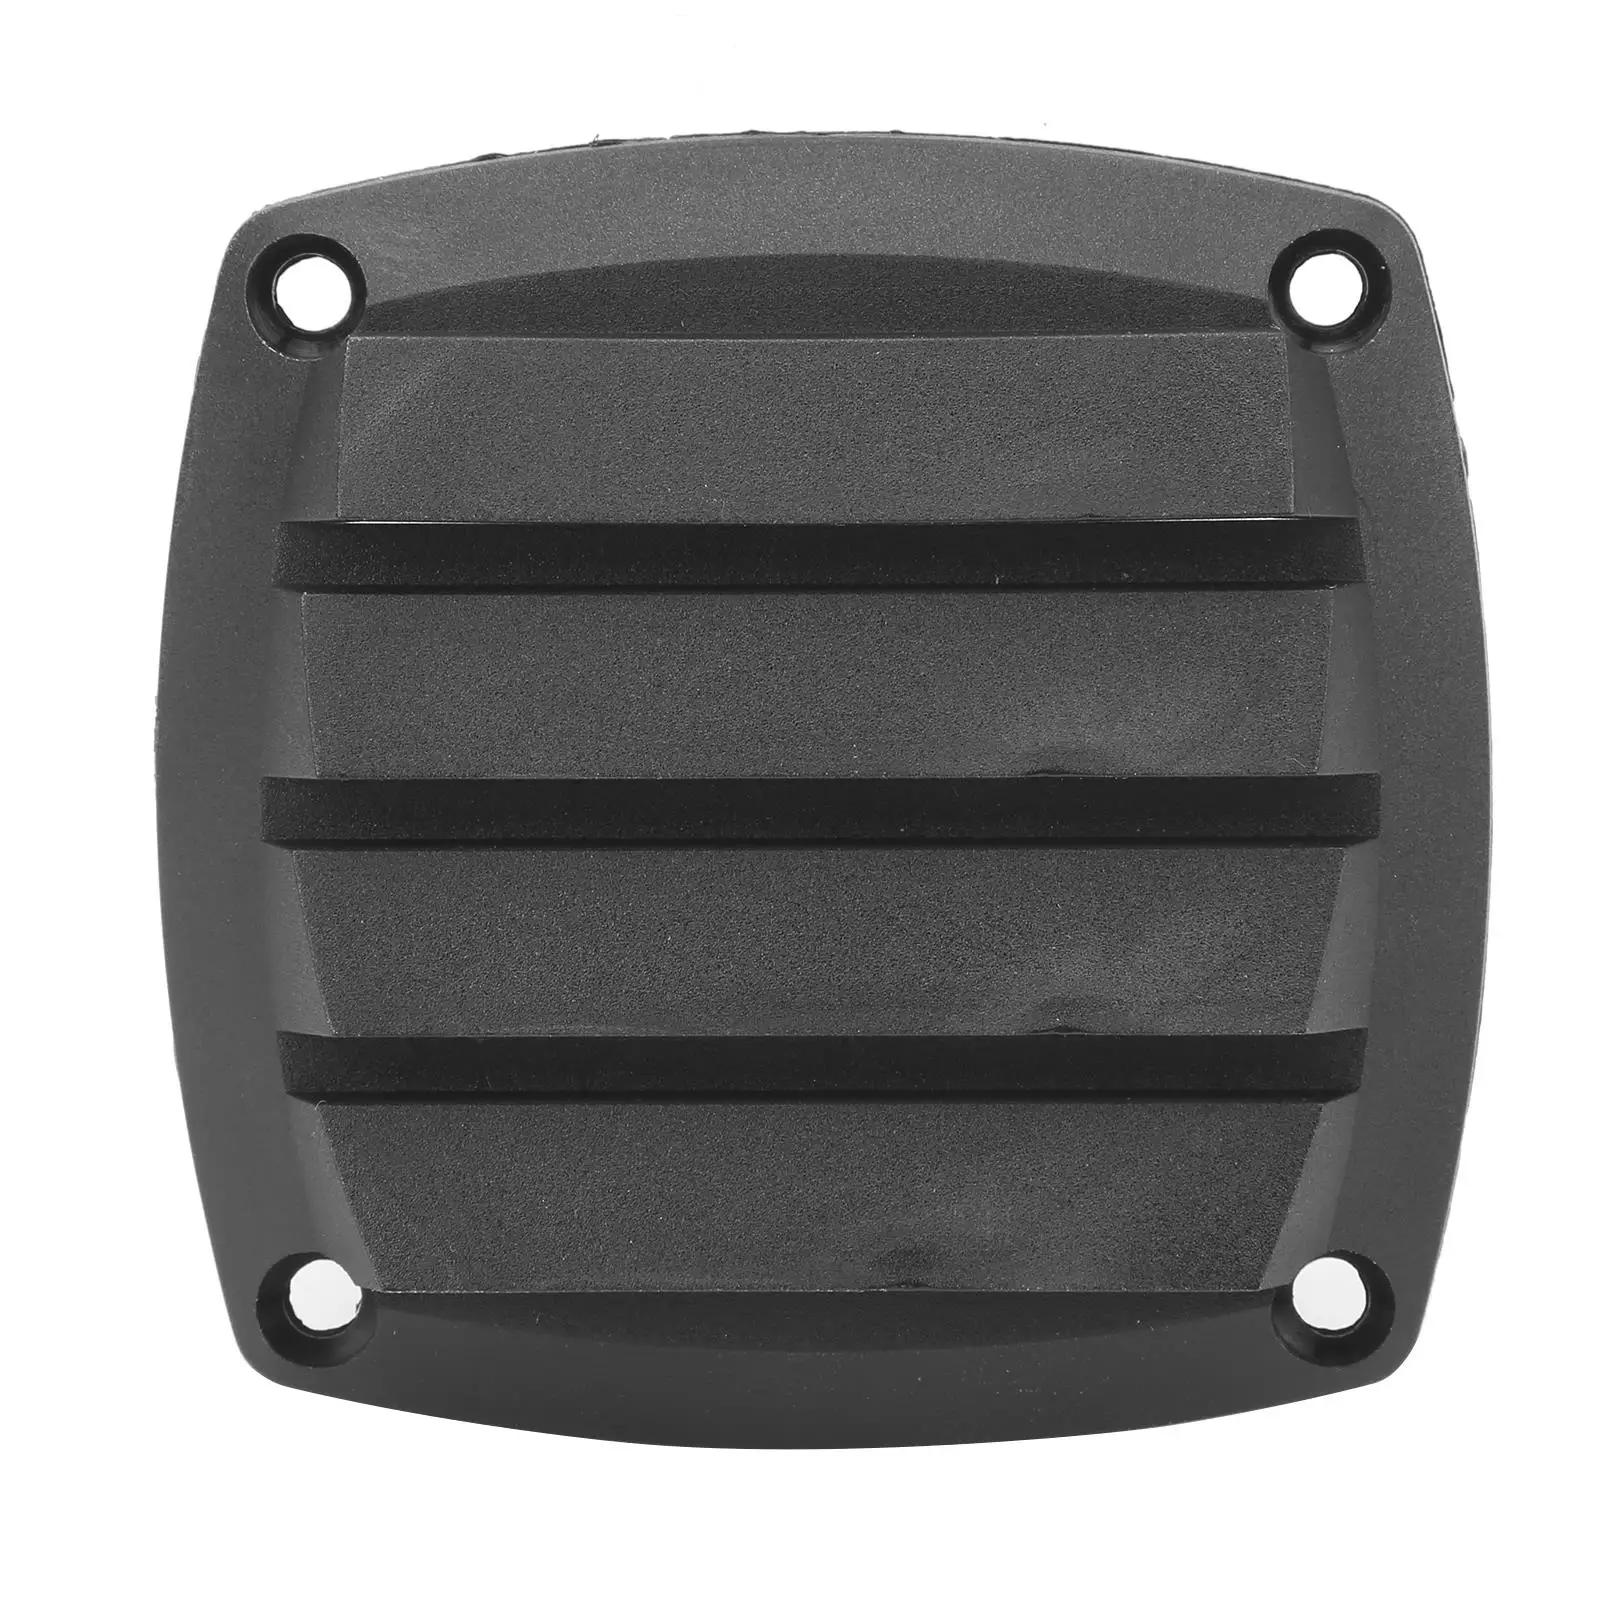 

Yacht Air Vent Louver: Lightweight, Durable Design for Boat Ventilation